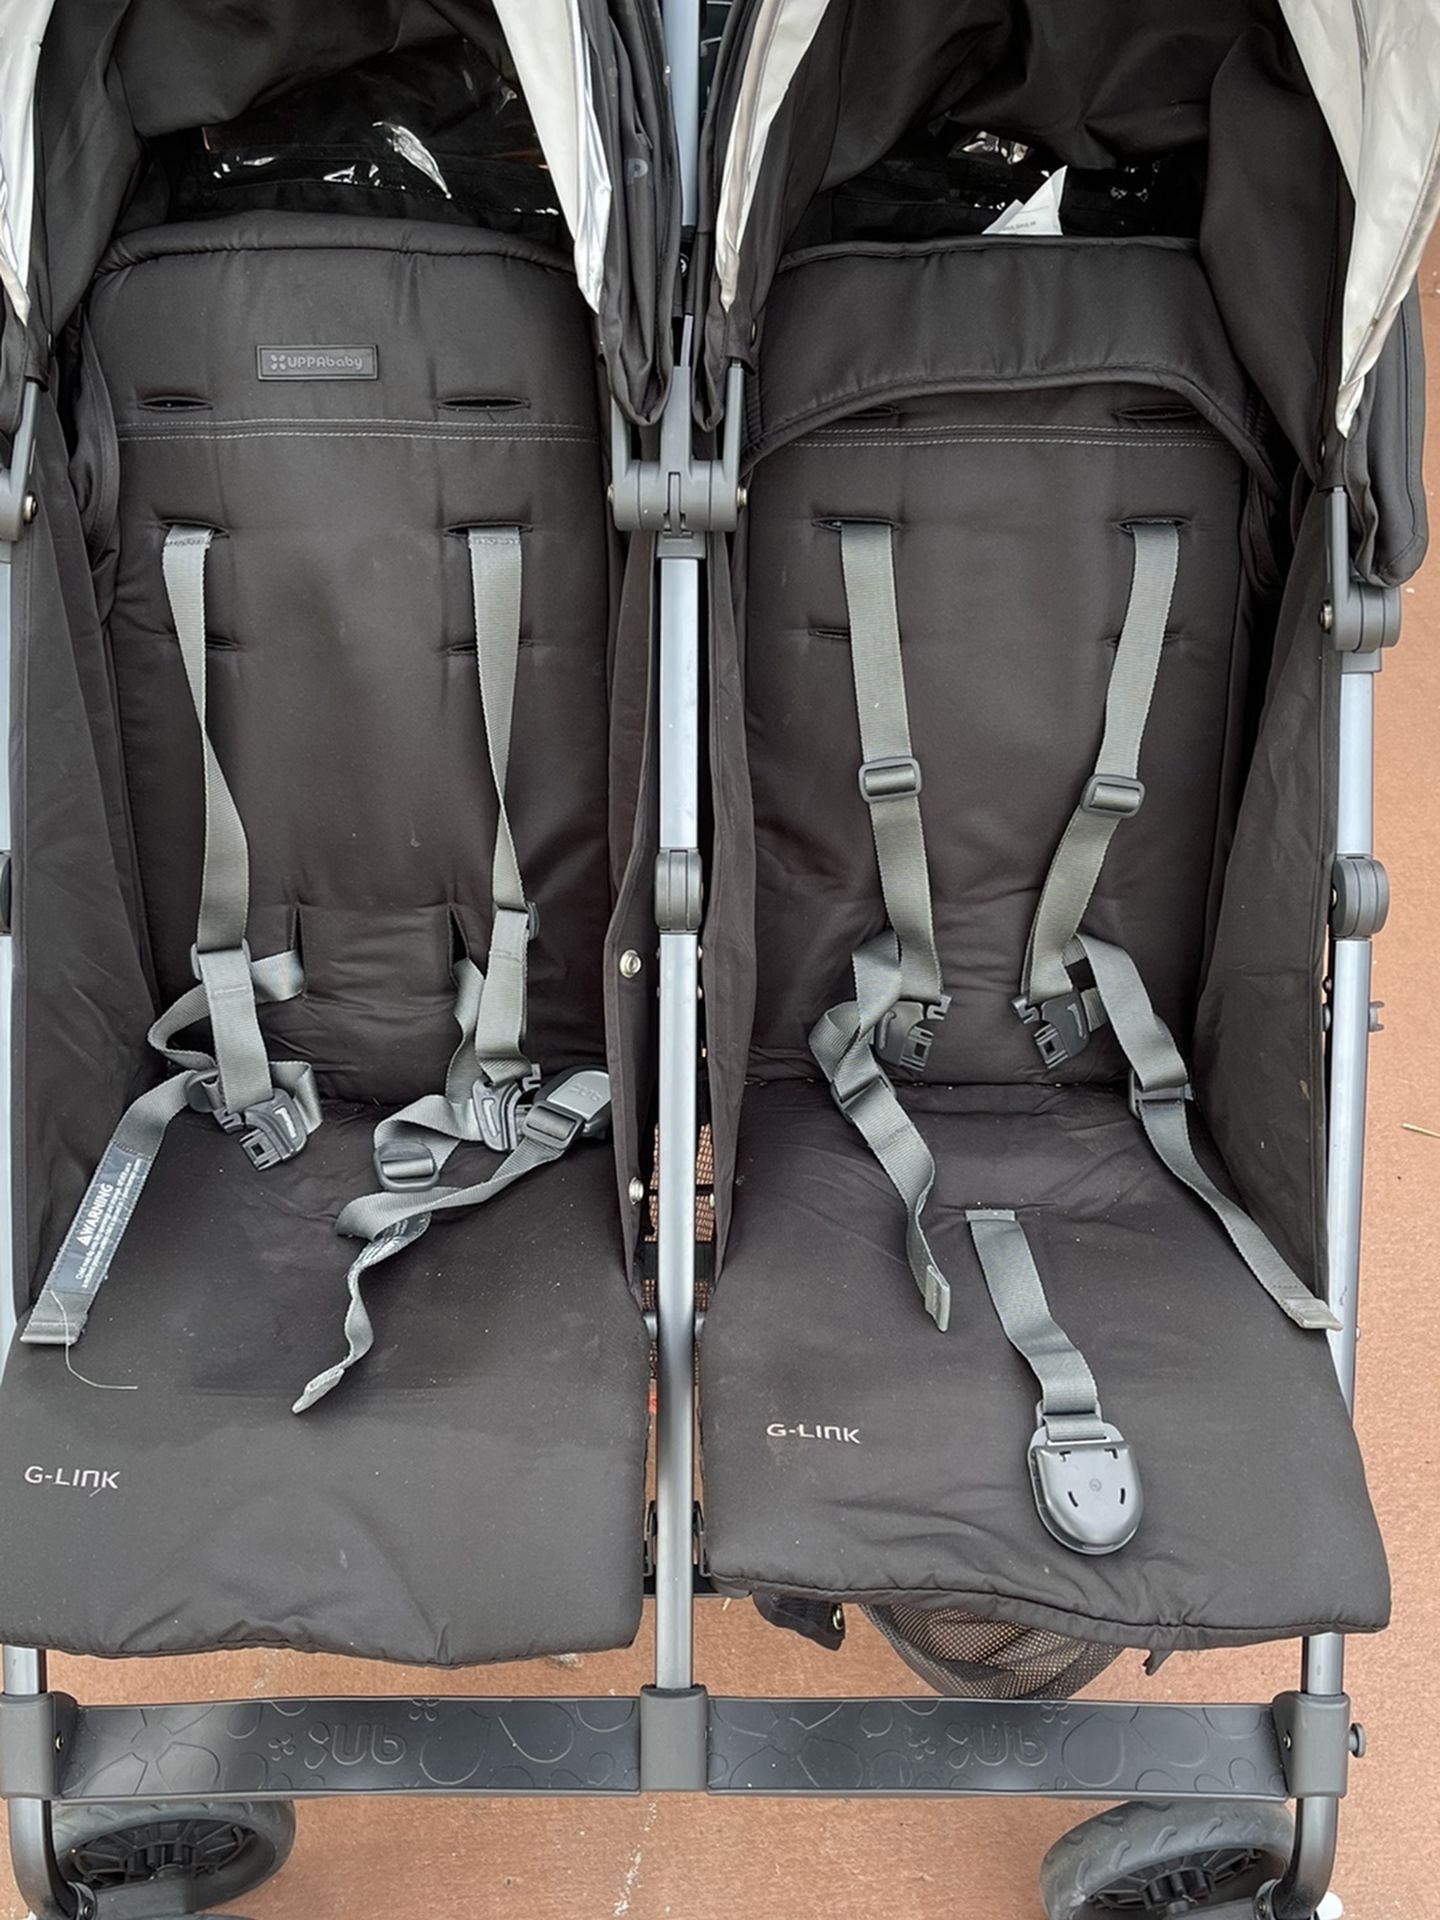 Uppababy G-Link Double stroller